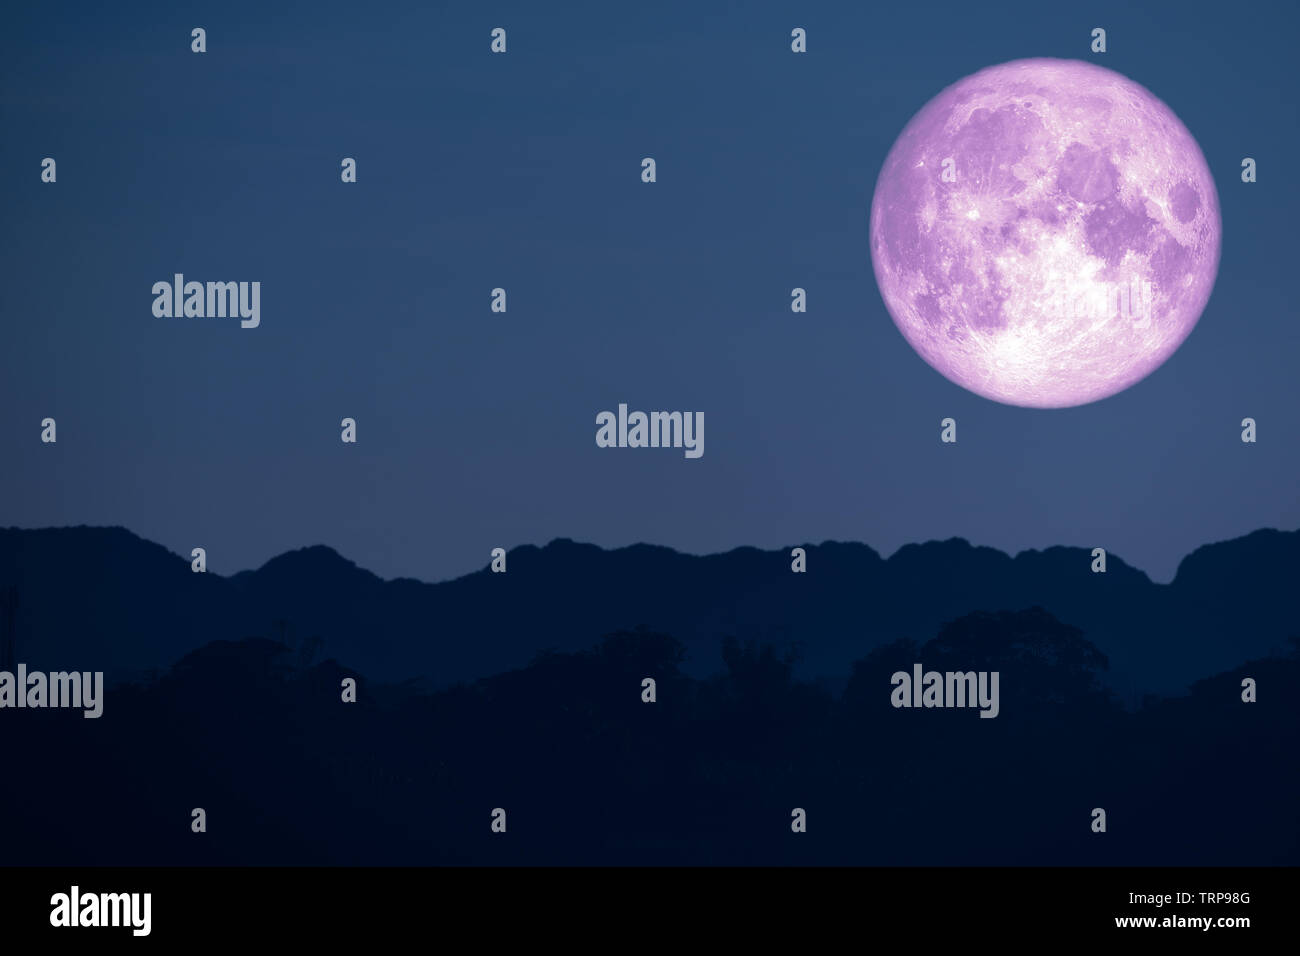 flower pink moon back on silhouette mountain on night sky, Elements of this image furnished by NASA Stock Photo